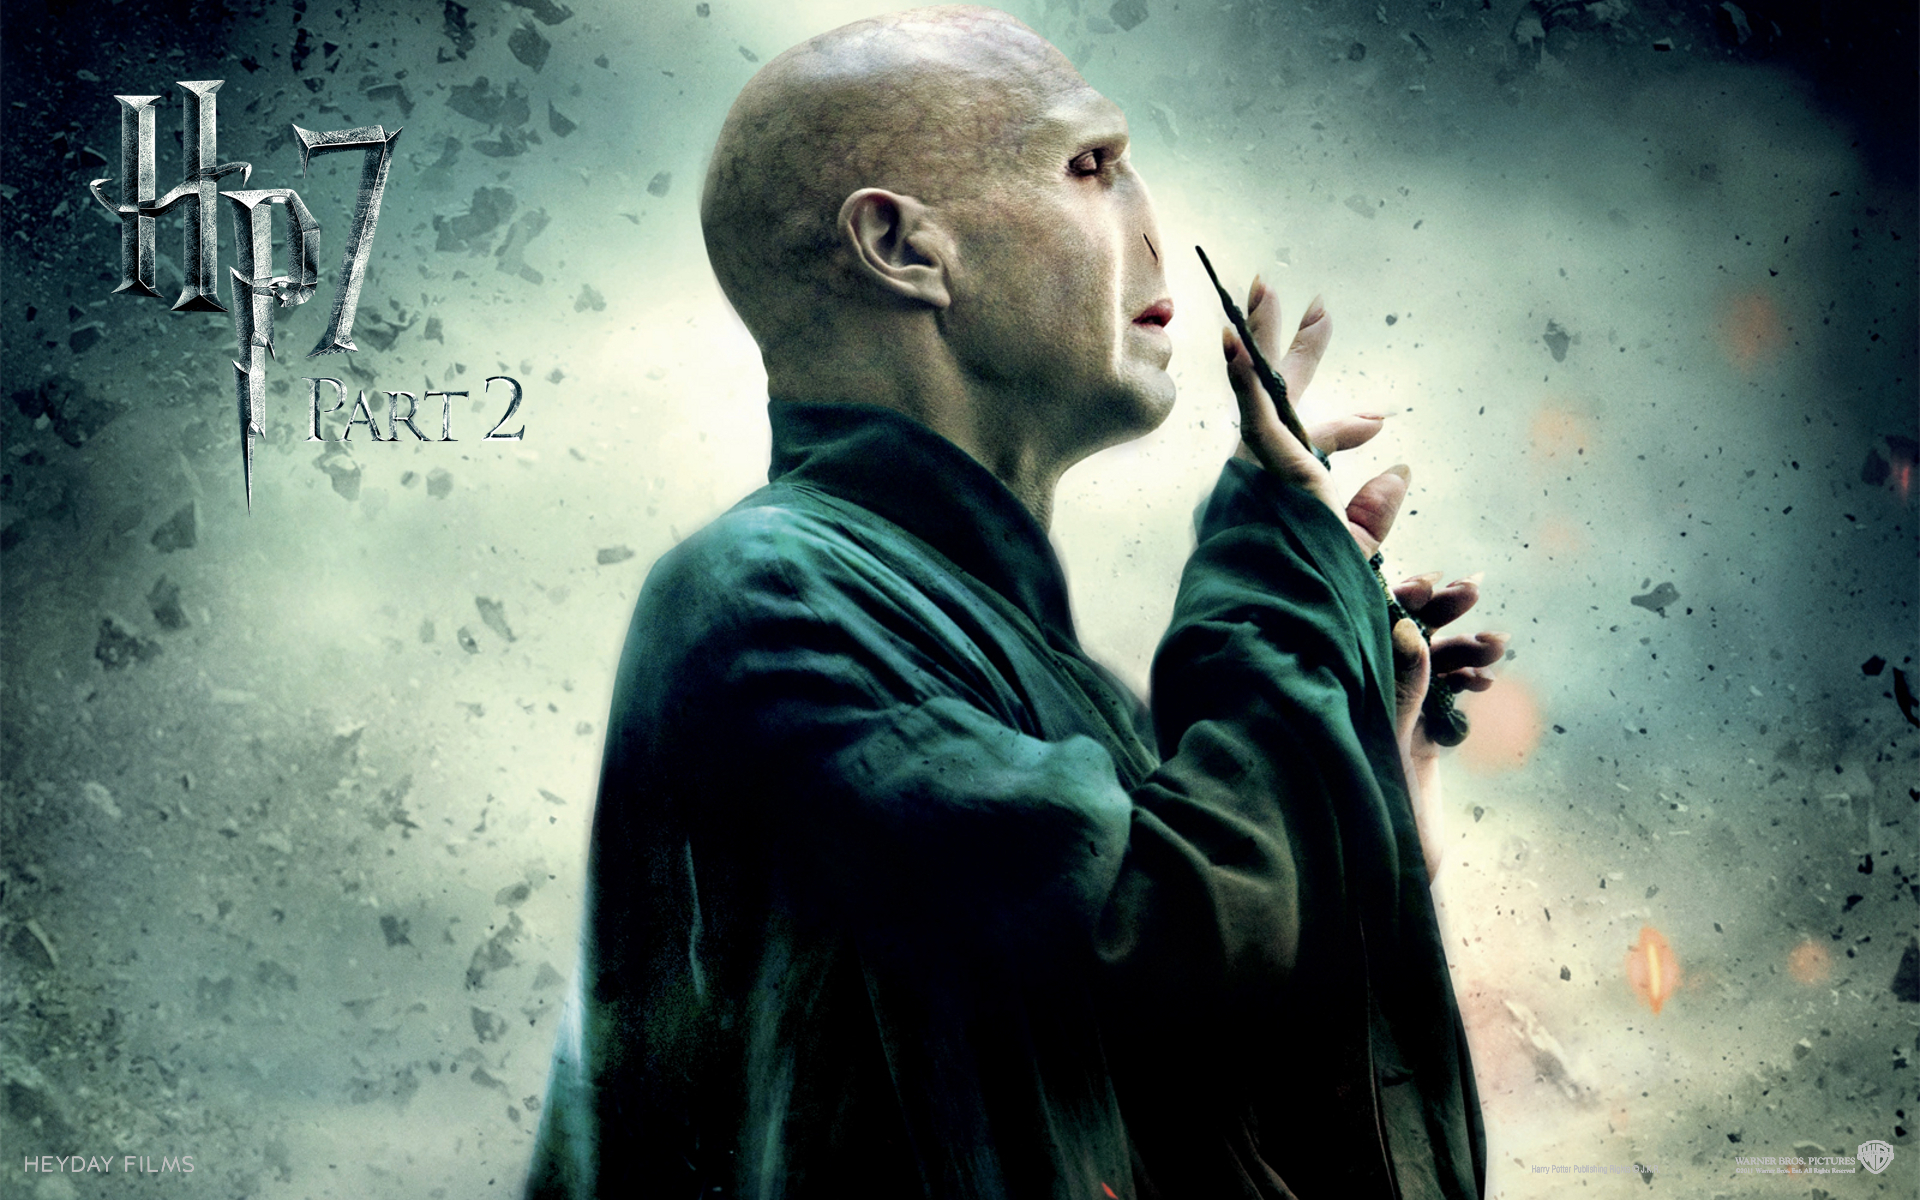 Lord Voldemort Wallpapers